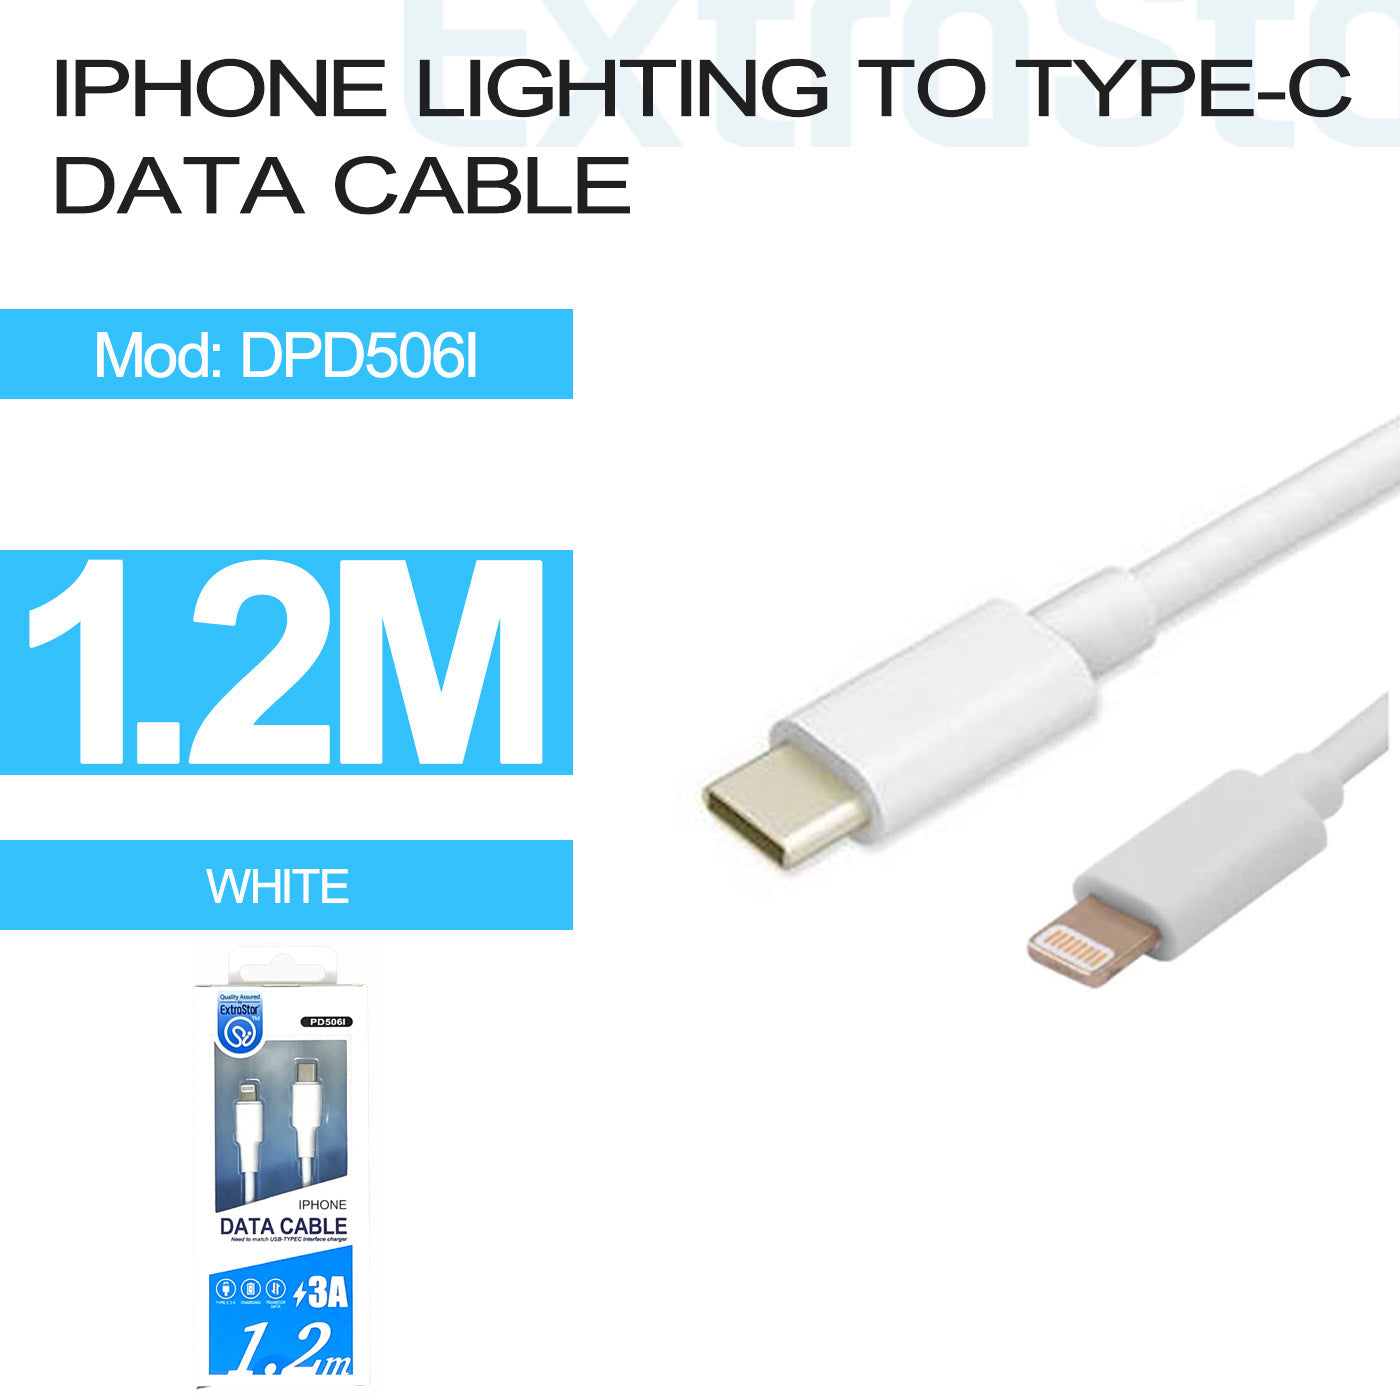 Iphone Lightning to Type C Data Cable, 1.2M, White (DPD506I)